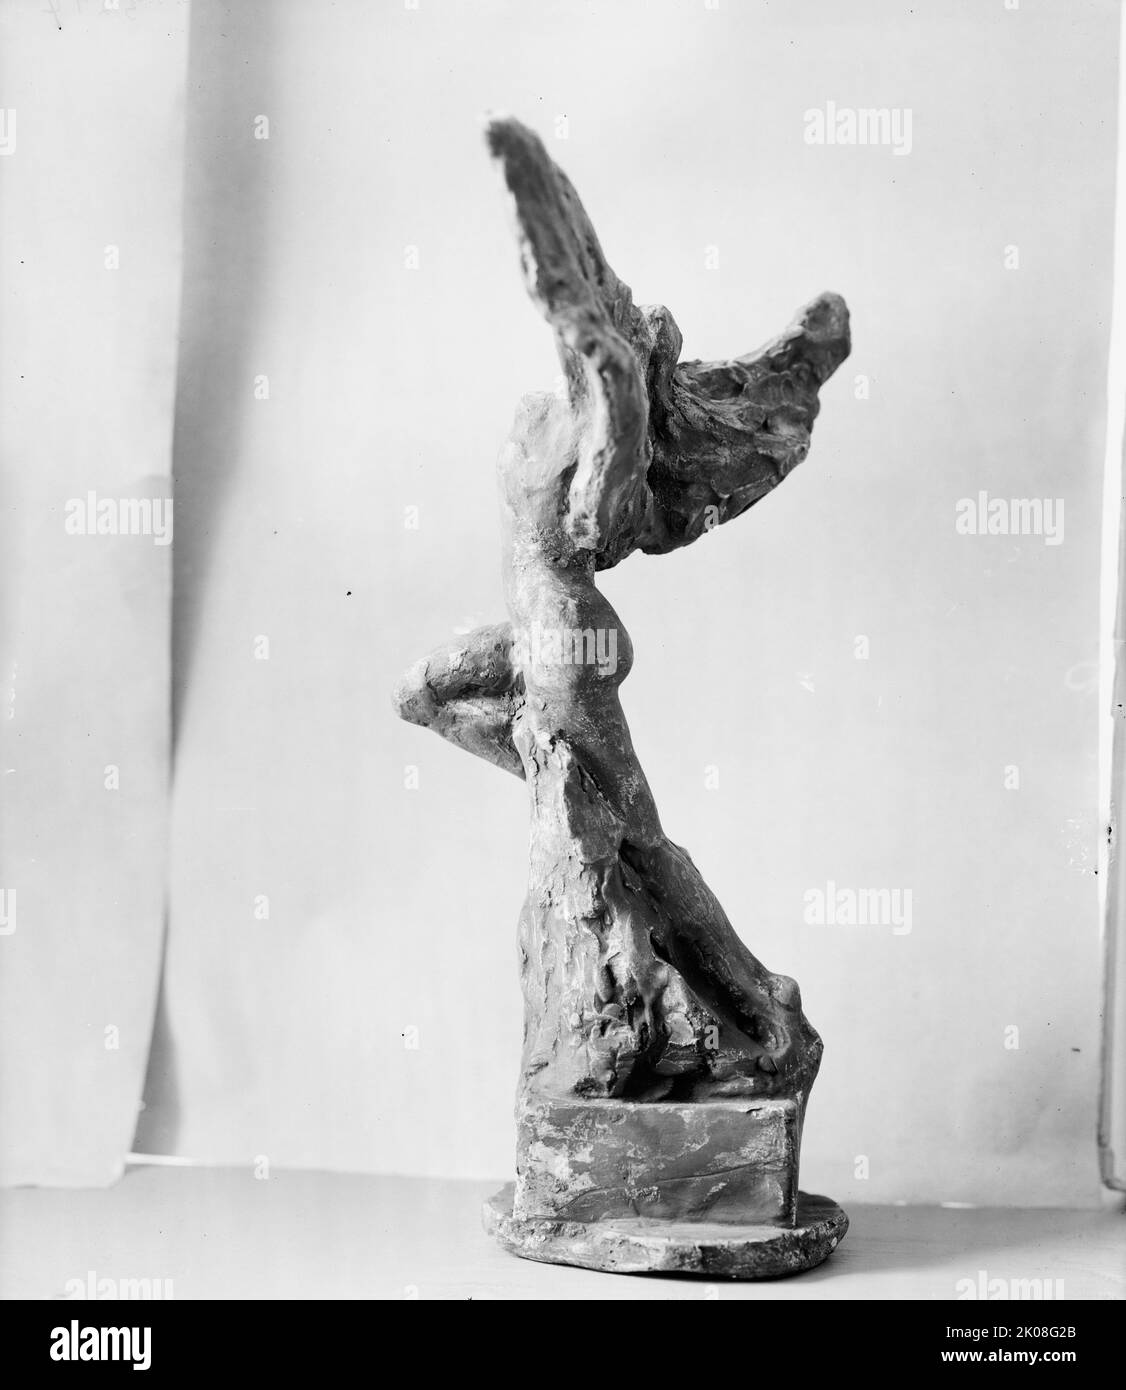 National Woman's Party, between 1910 and 1920. [Maquette of sculpture]. Stock Photo